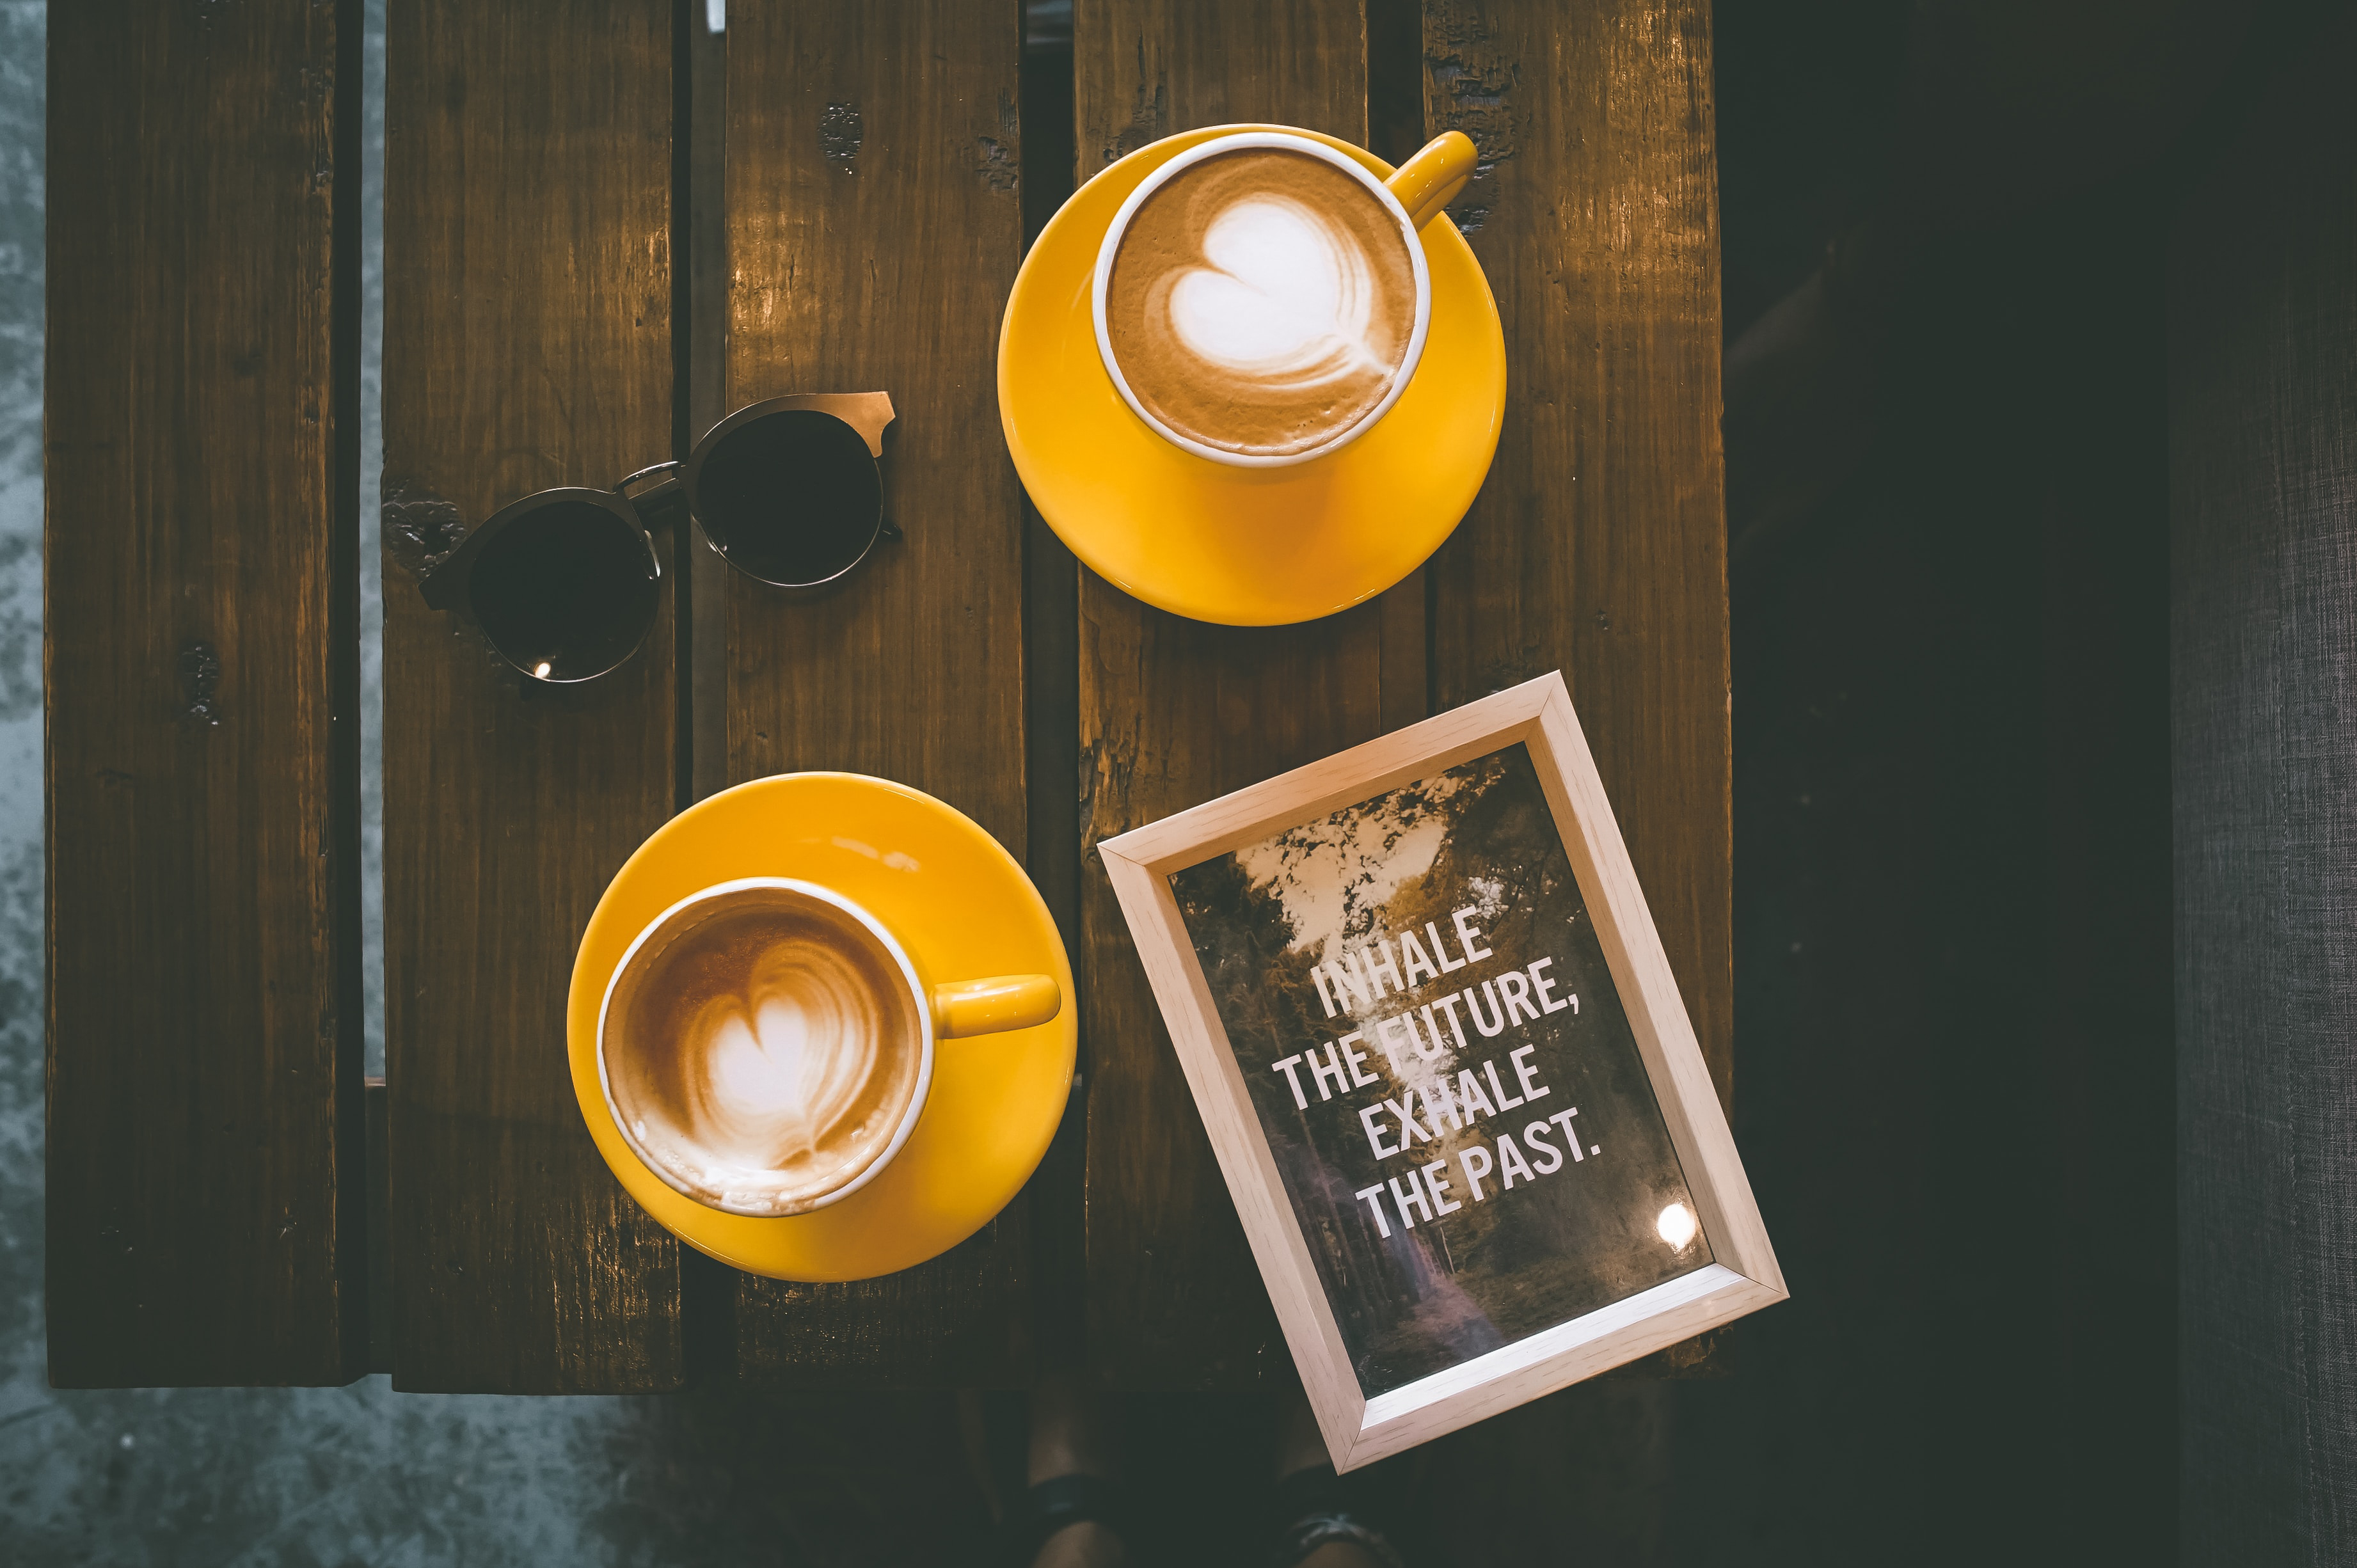 A photo from Cebu City, Philippines, showing two mugs containing cappuccinos on a table alongside a picture frame containing a quote with these words all in capital letters: "INHALE THE FUTURE, EXHALE THE PAST"